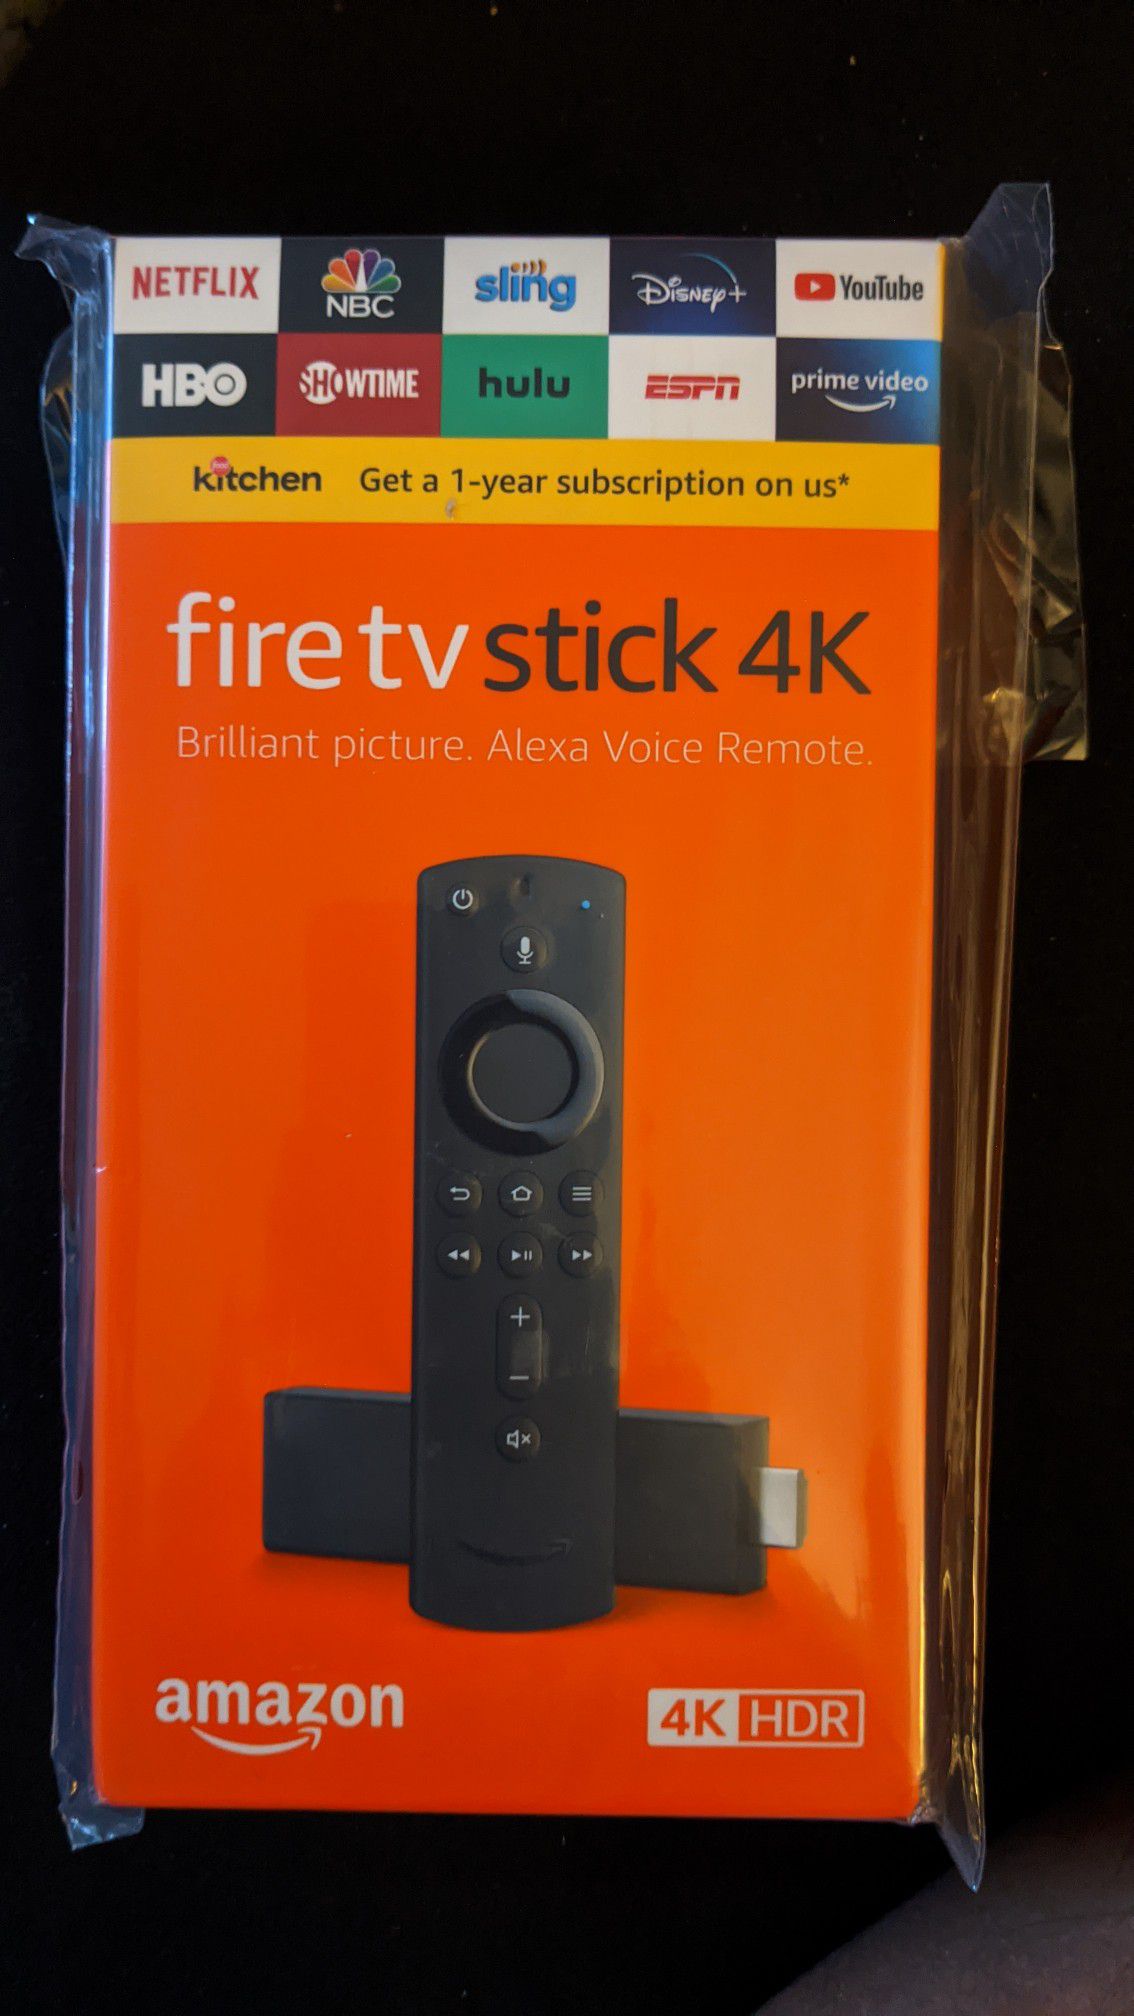 Fire TV Stick 4K streaming device with Alexa built in, Dolby Vision, includes Alexa Voice Remote